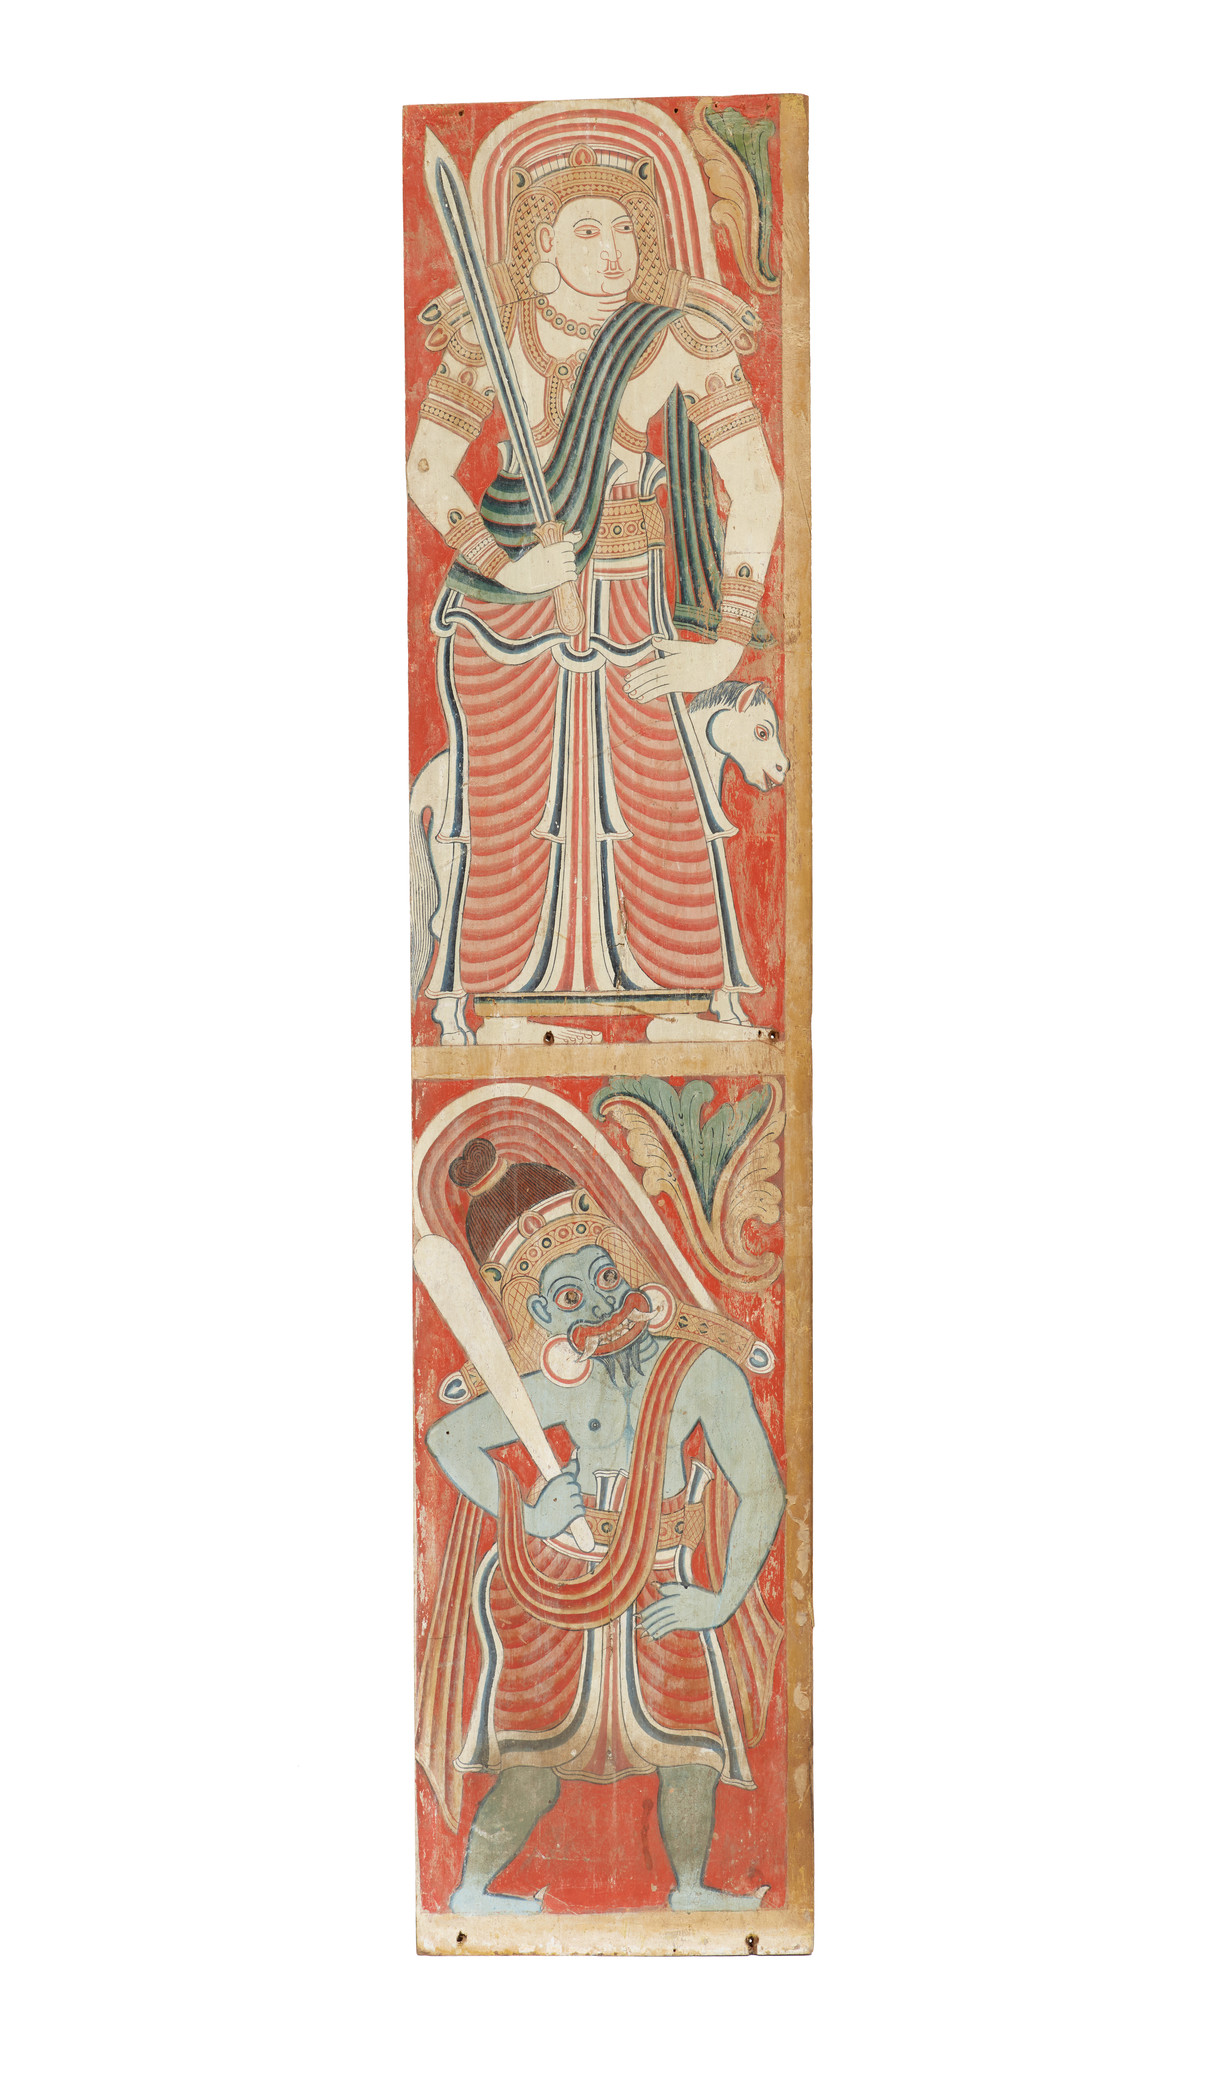 The God Aiyanar (?) with a Demon Attendant, Panel from a Buddhist Shrine, 17th–18th century, Los Angeles County Museum of Art, gift of Mr. and Mrs. James Coburn, III, photo © Museum Associates/LACMA